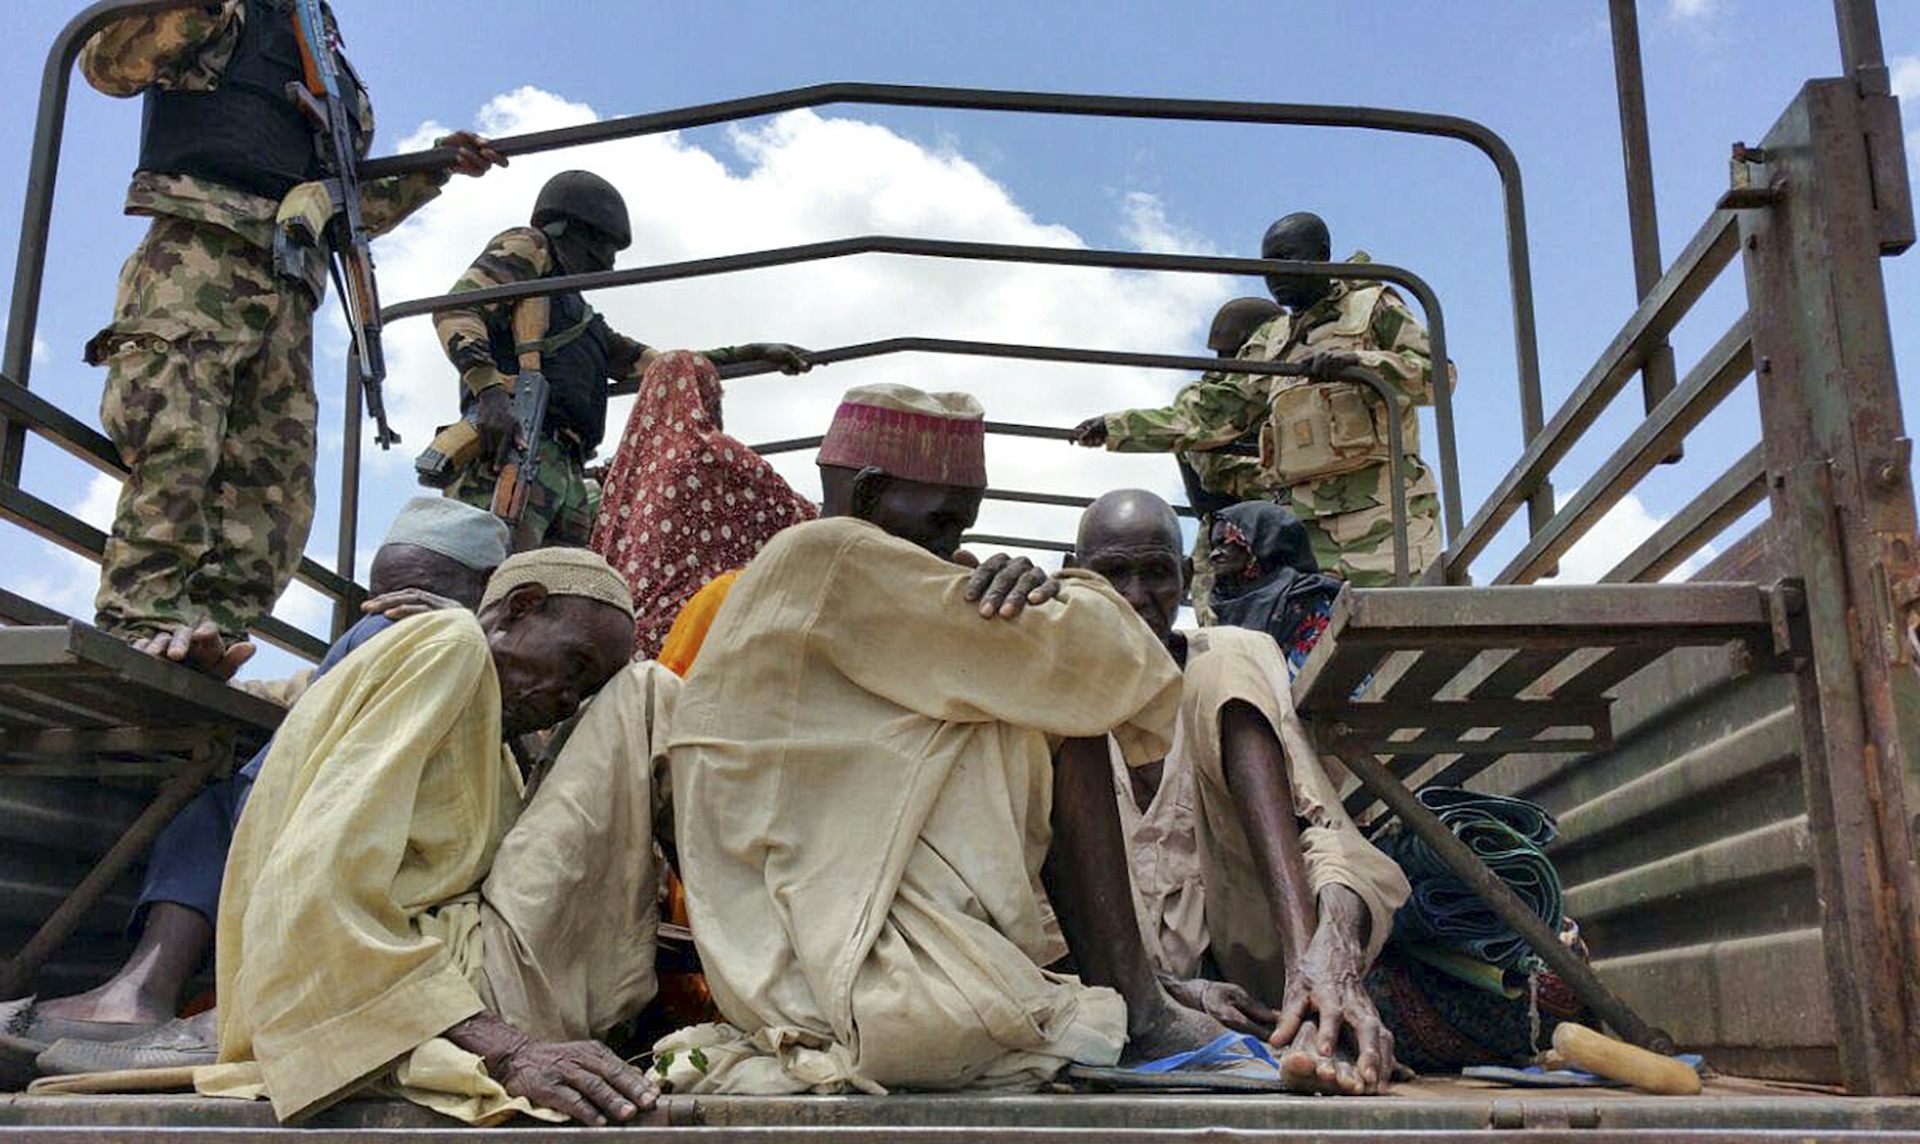 What Can Be Done to Fight Rural Banditry in Northern Nigeria